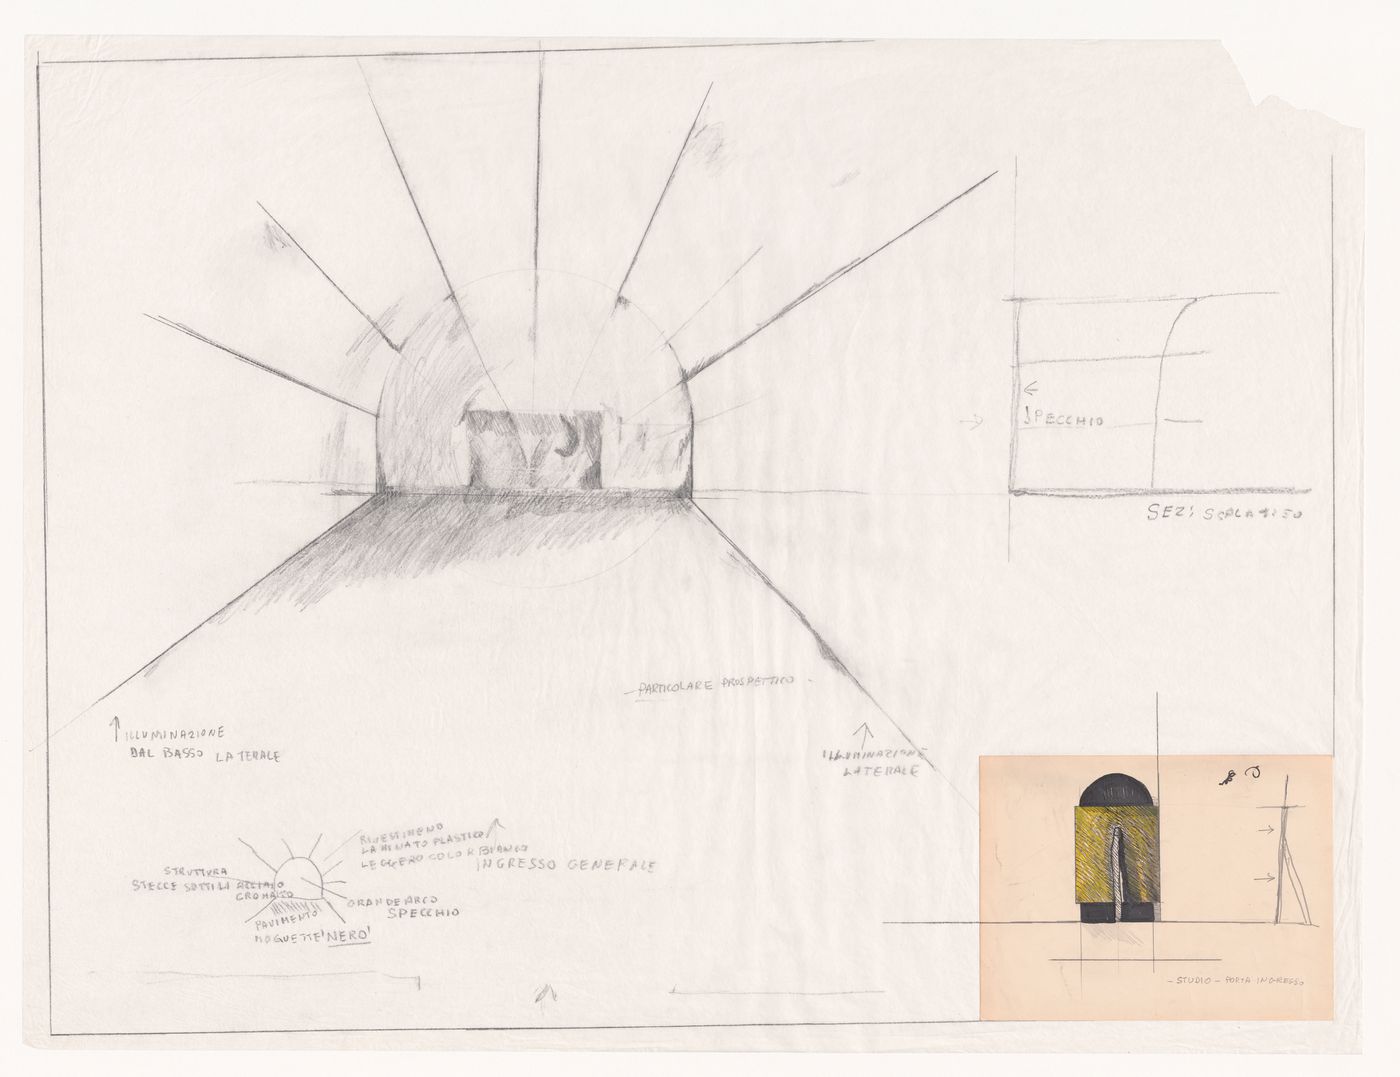 Sketch perspective with notes for Design shop, Montecatini Terme, Pistoia, Italy